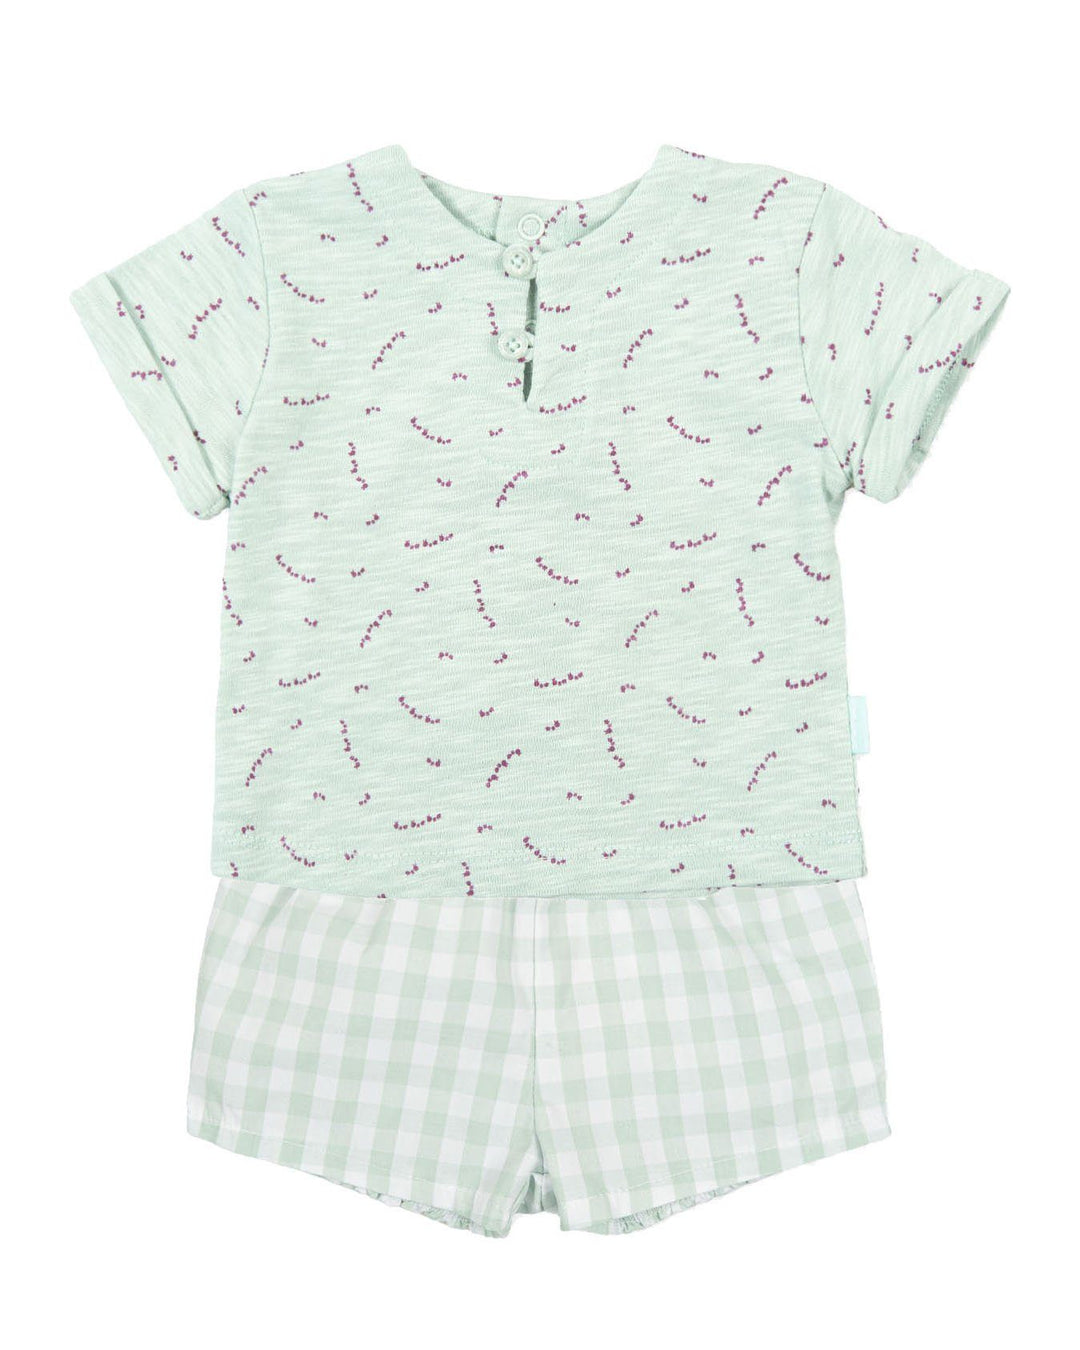 Tutto Piccolo "Mallory" Sage Green T-Shirt & Shorts | Millie and John